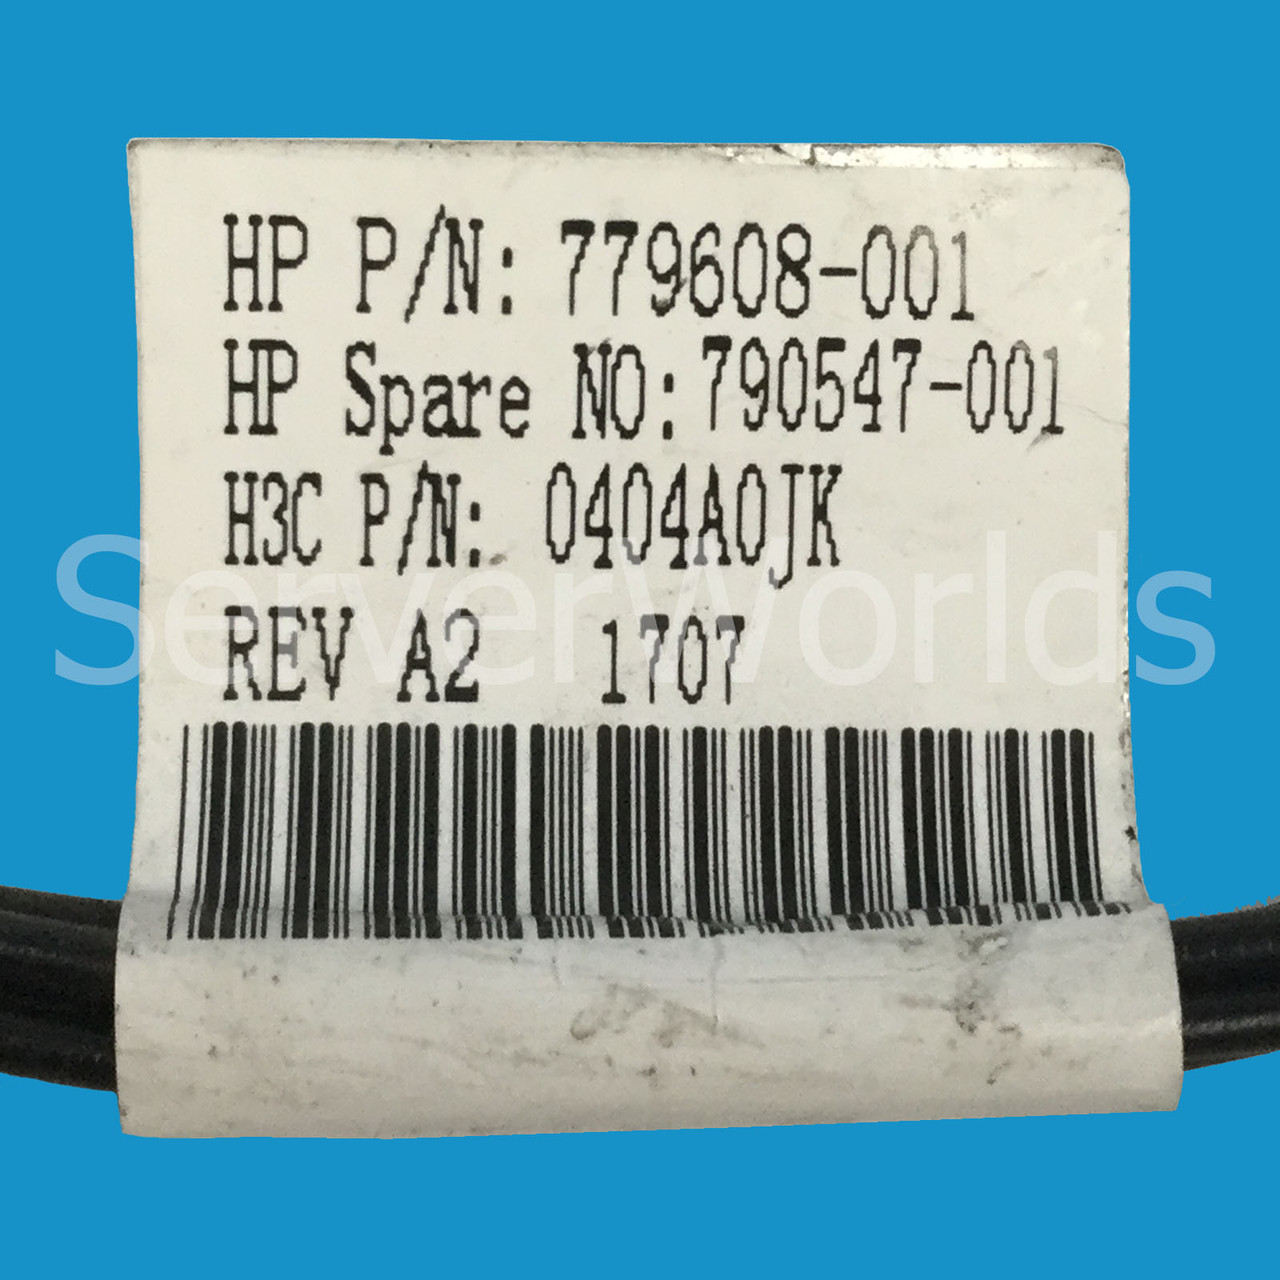 HP 790547-001 GPU Y power cable - new bagged 779608-001